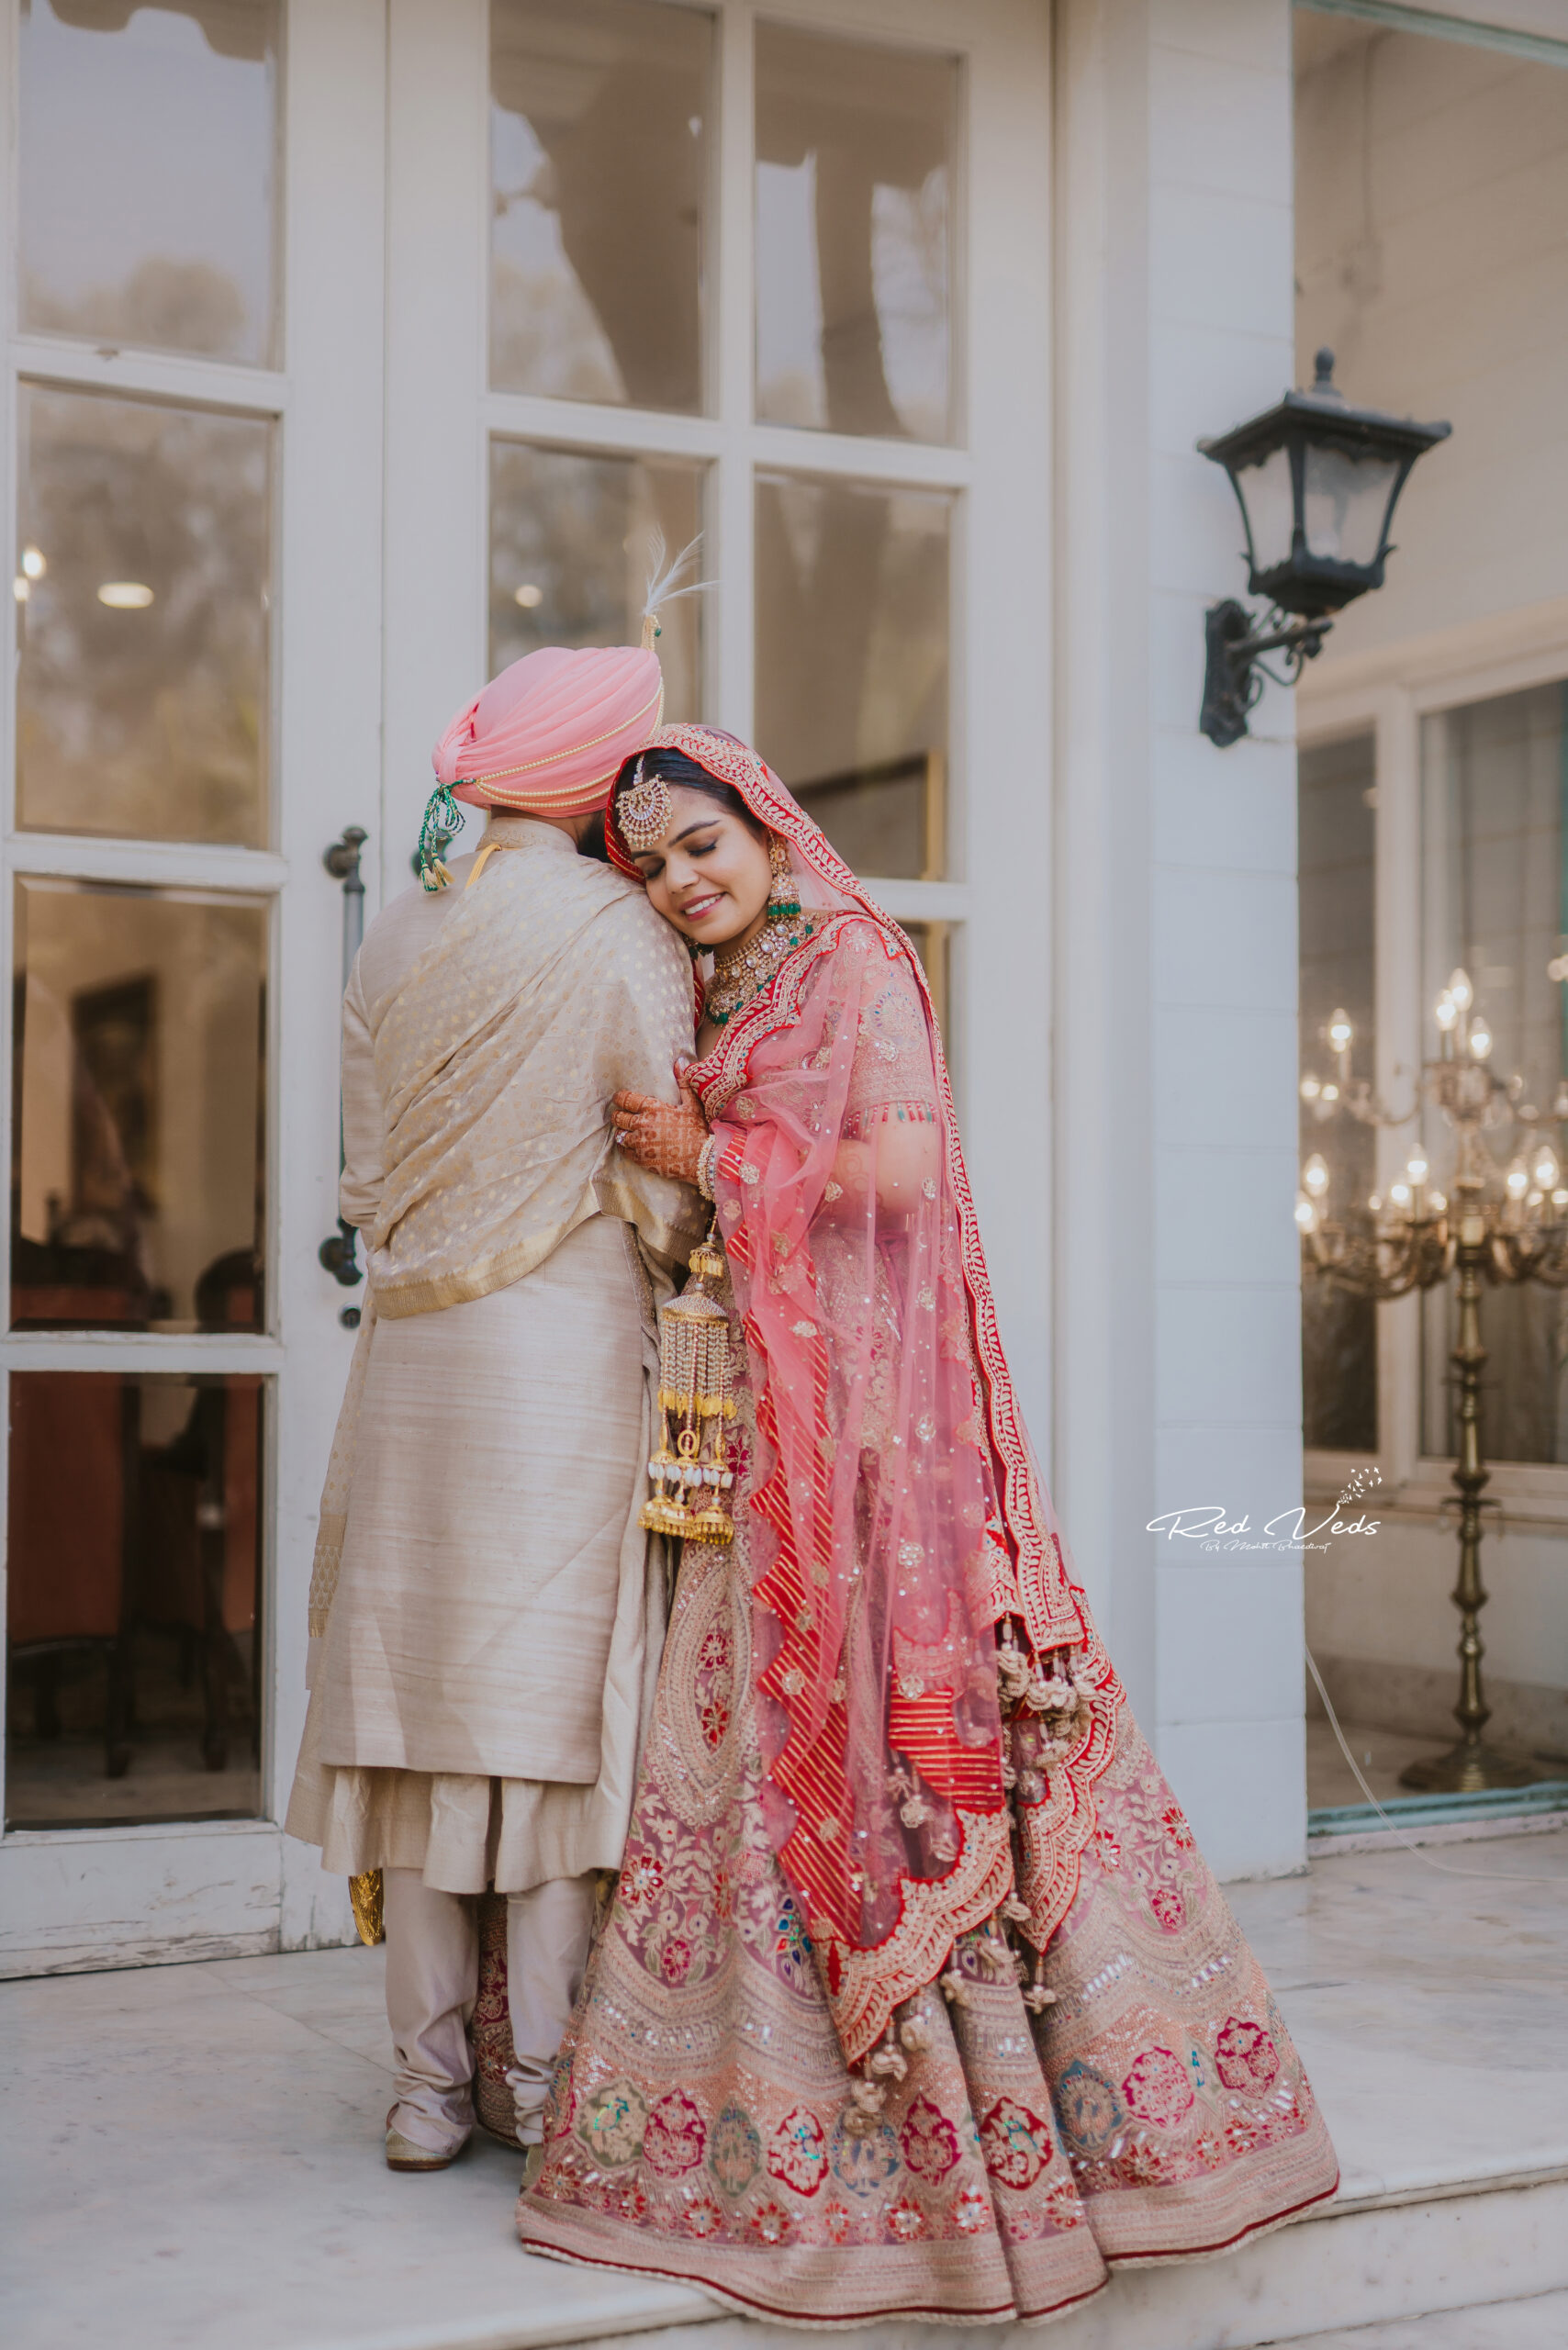 Yaari Dosti Shaadi - Wedding pictures you MUST take with friends!